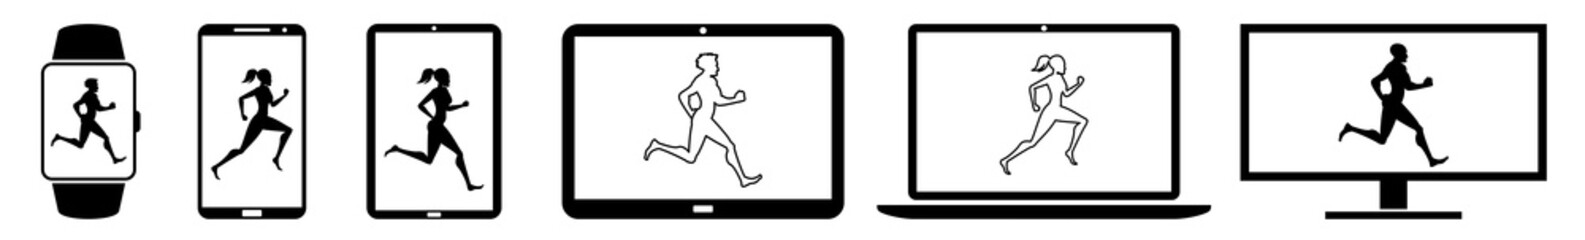 Display running, man, men, woman, women, runner, runners, run, silhouette Icon Devices Set | Web Screen Device Online | Laptop Vector Illustration | Mobile Phone | PC Computer Sign Isolated